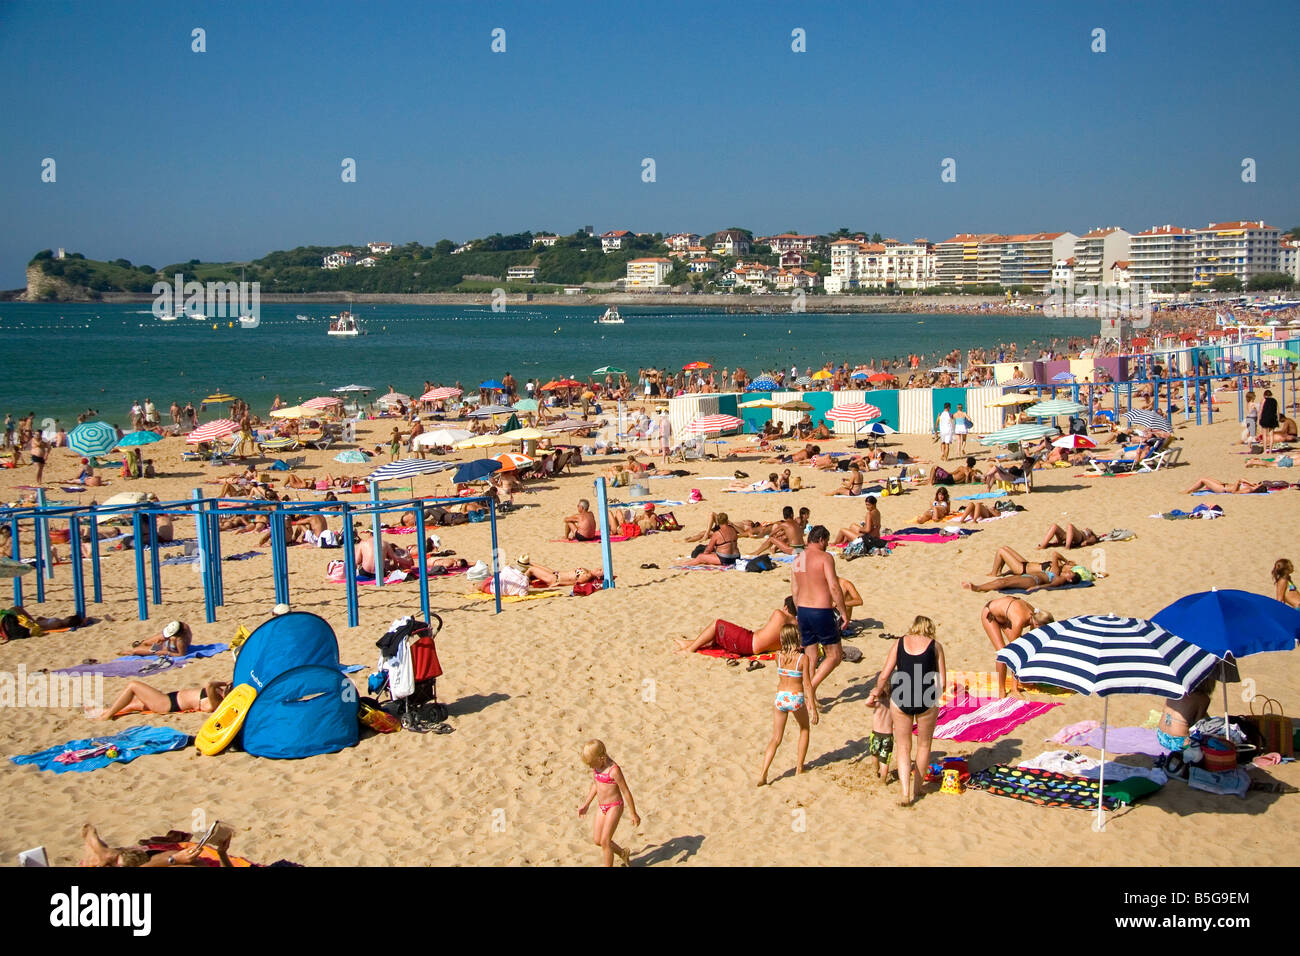 Beach scene in the bay at Saint Jean de Luz Pyrenees Atlantiques French  Basque Country Southwest France Stock Photo - Alamy